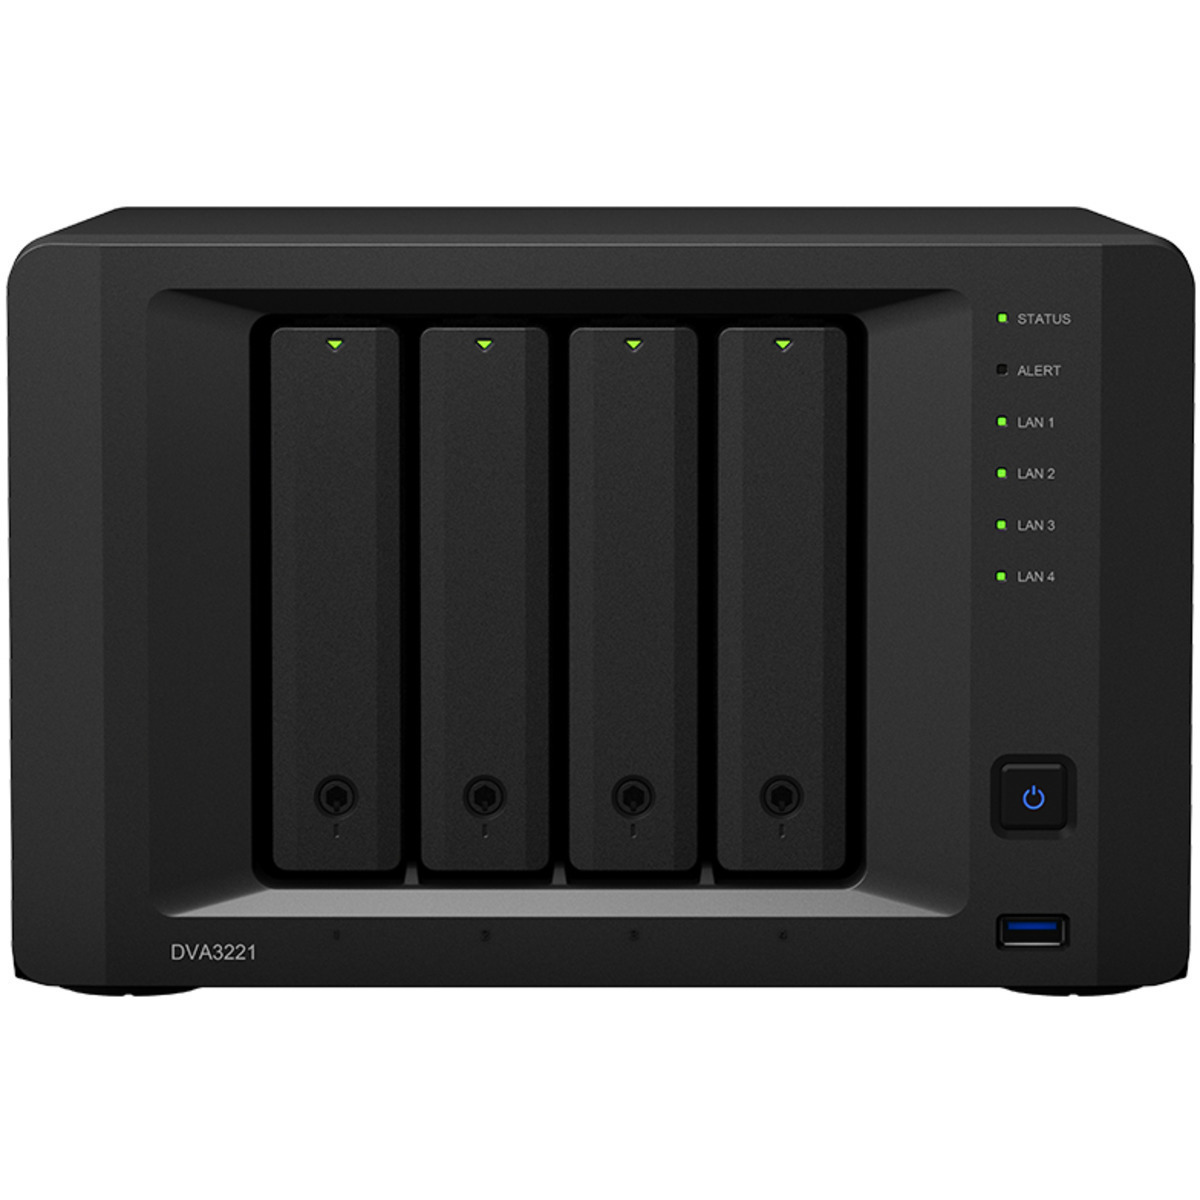 buy $3725 Synology DVA3221 DVR 16tb Desktop NVR - Network Video Recorder 4x4000gb Western Digital Blue WD40EZRZ 3.5 5400rpm SATA 6Gb/s HDD CONSUMER Class Drives Installed - Burn-In Tested - nas headquarters buy network attached storage server device das new raid-5 free shipping usa christmas new year holiday sale DVA3221 DVR